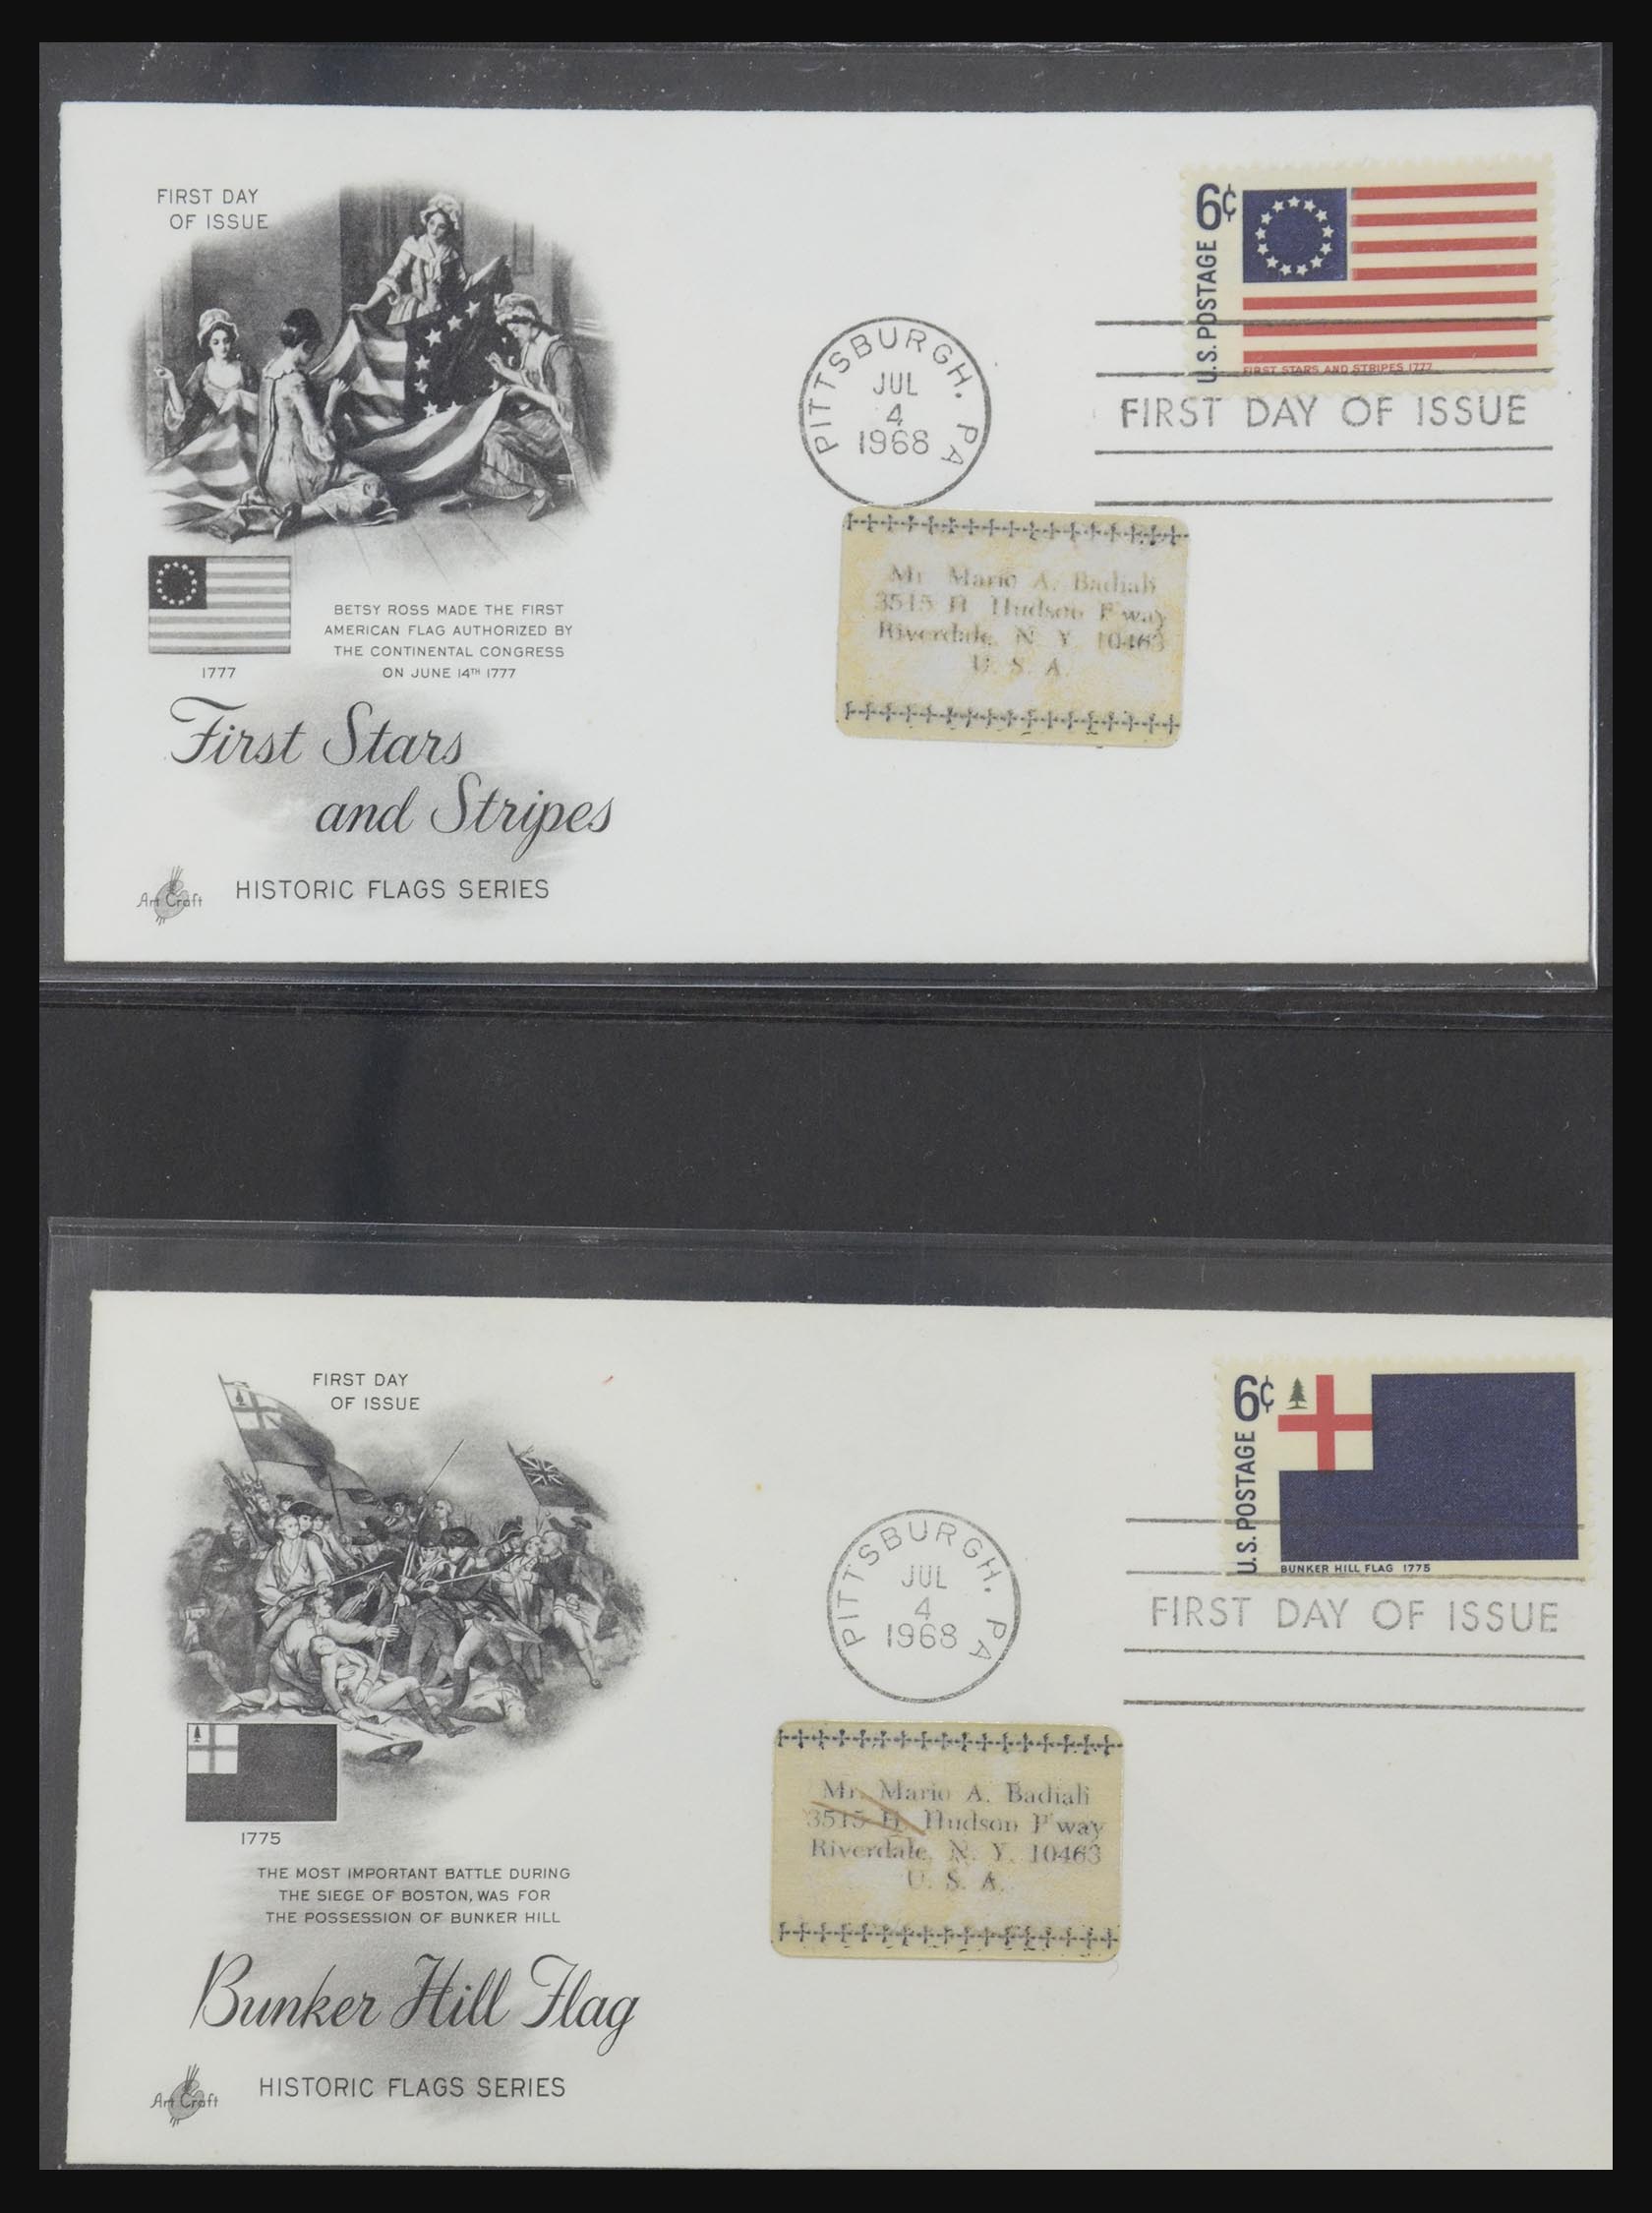 31913 0056 - 31913 USA first day cover collection 1945-1990.